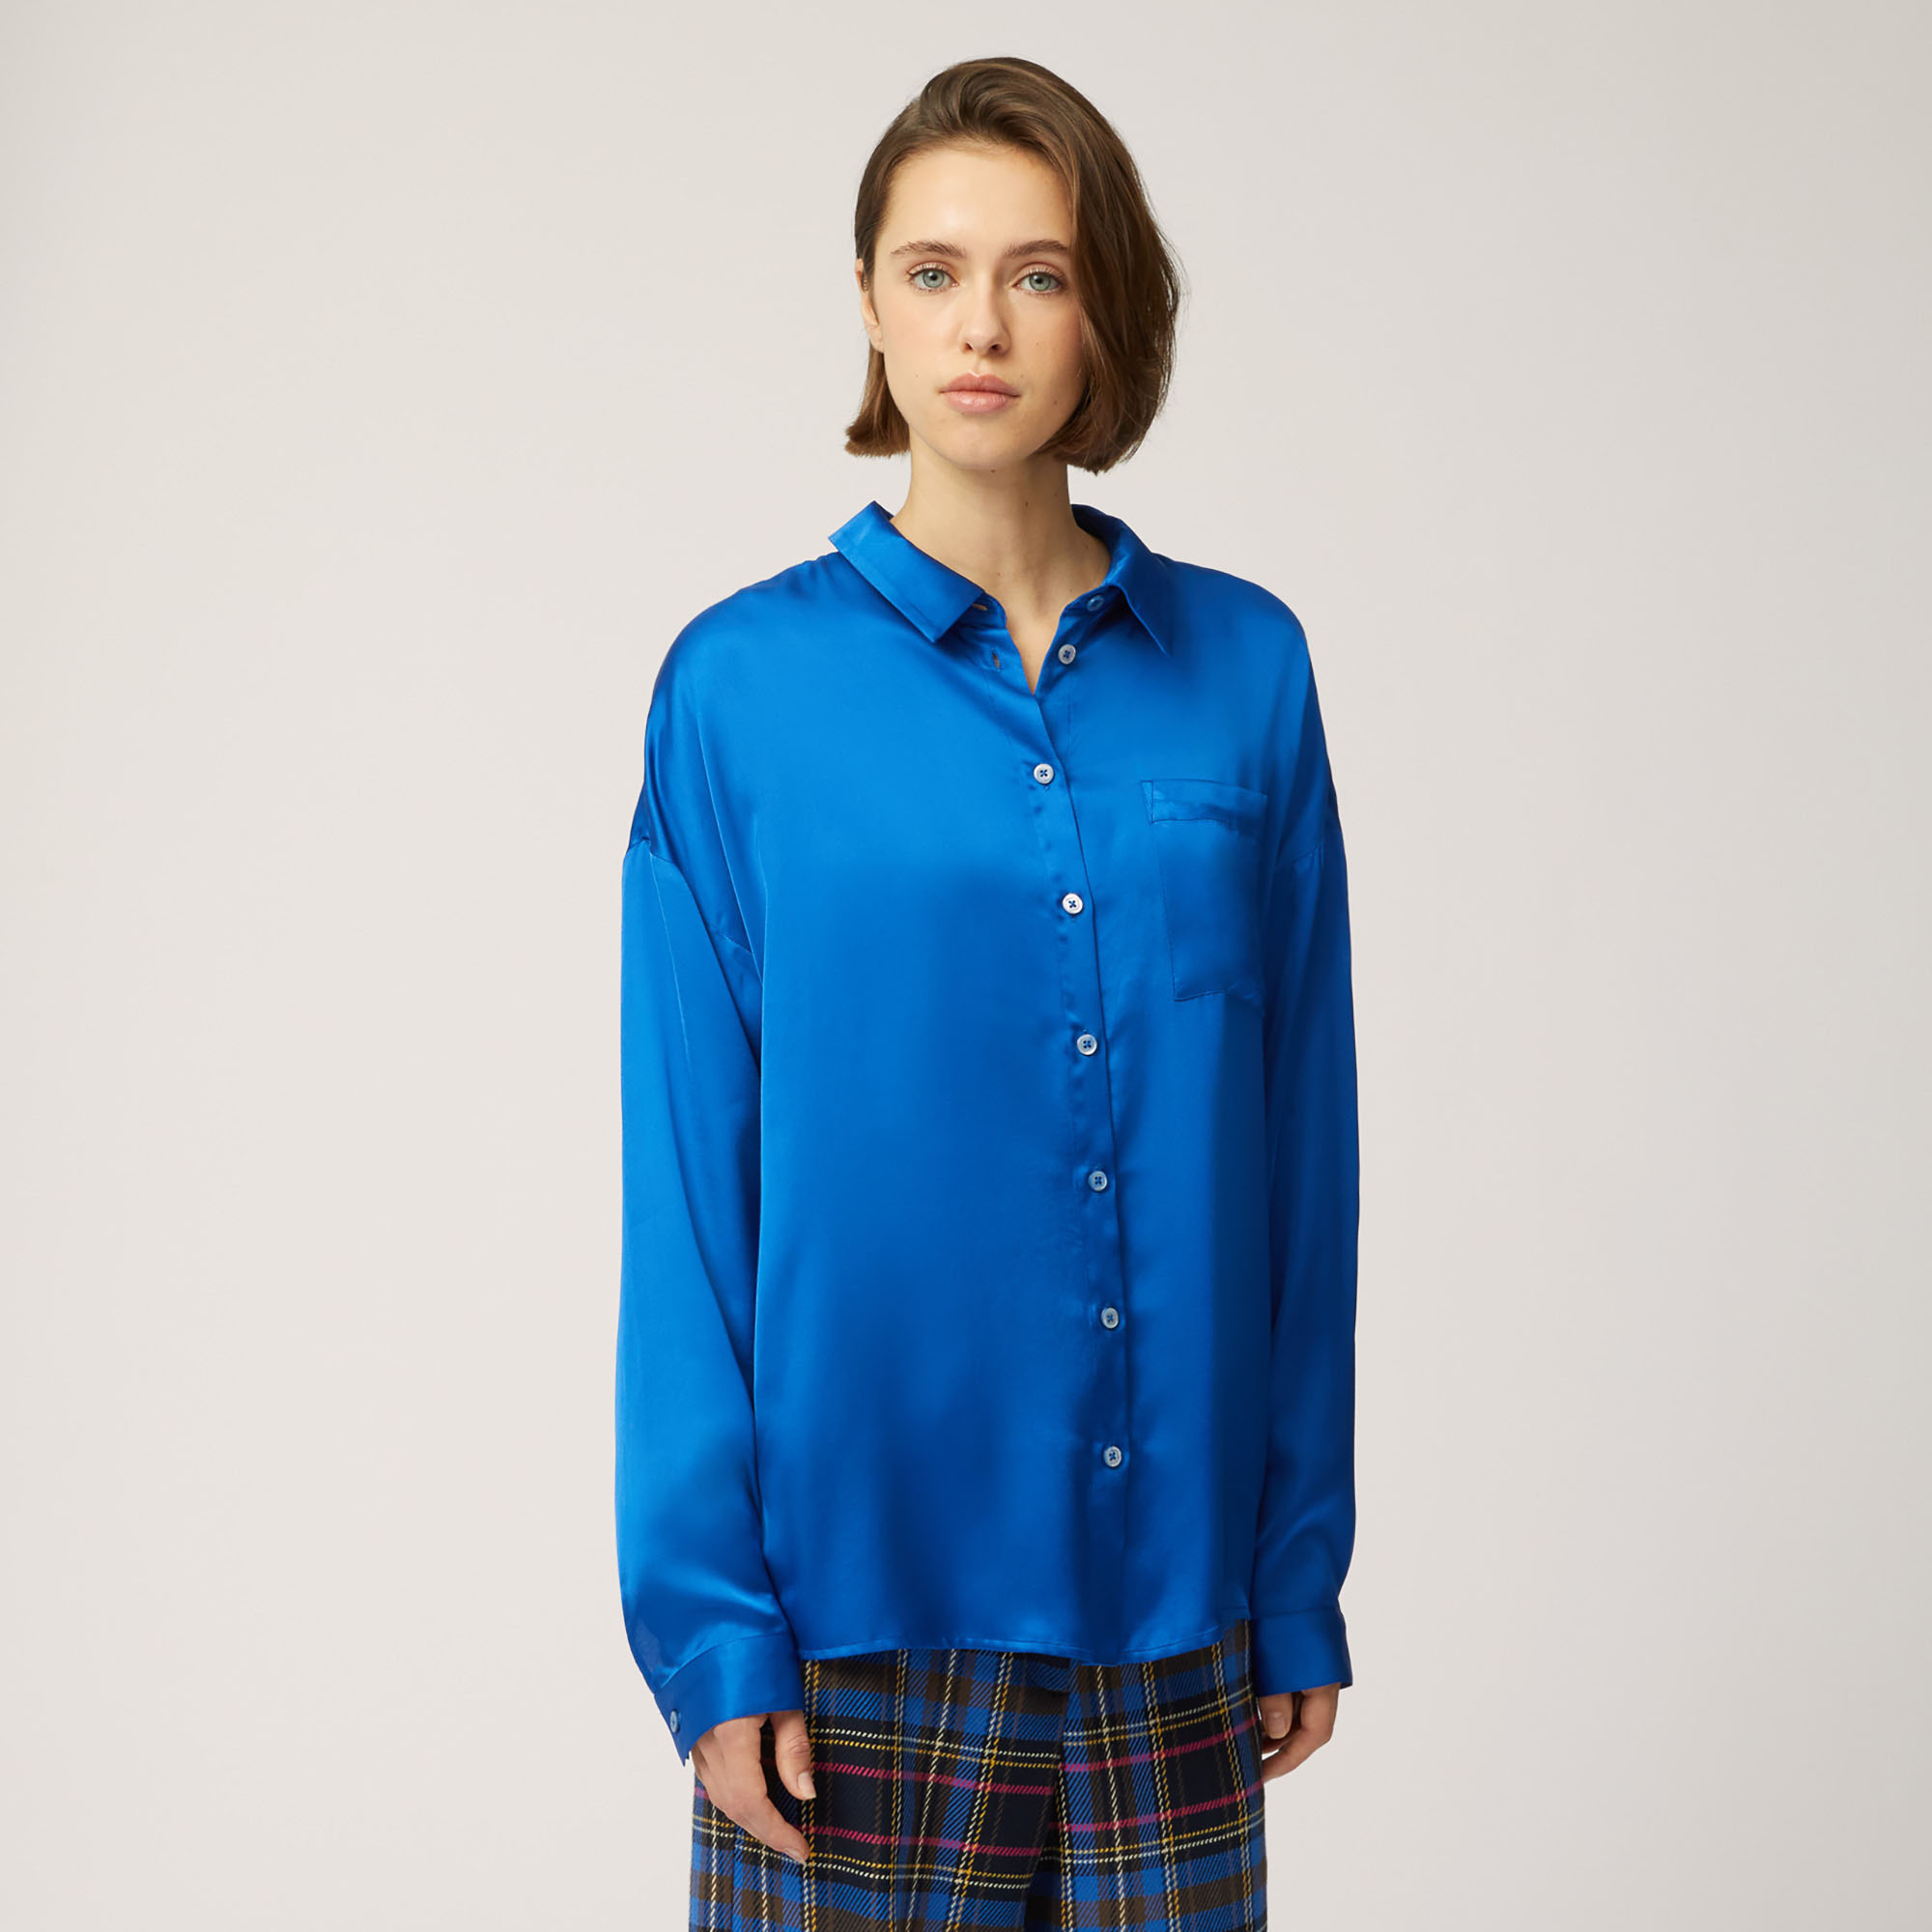 Boxy Shirt With Buttons On The Back, Light Blue, large